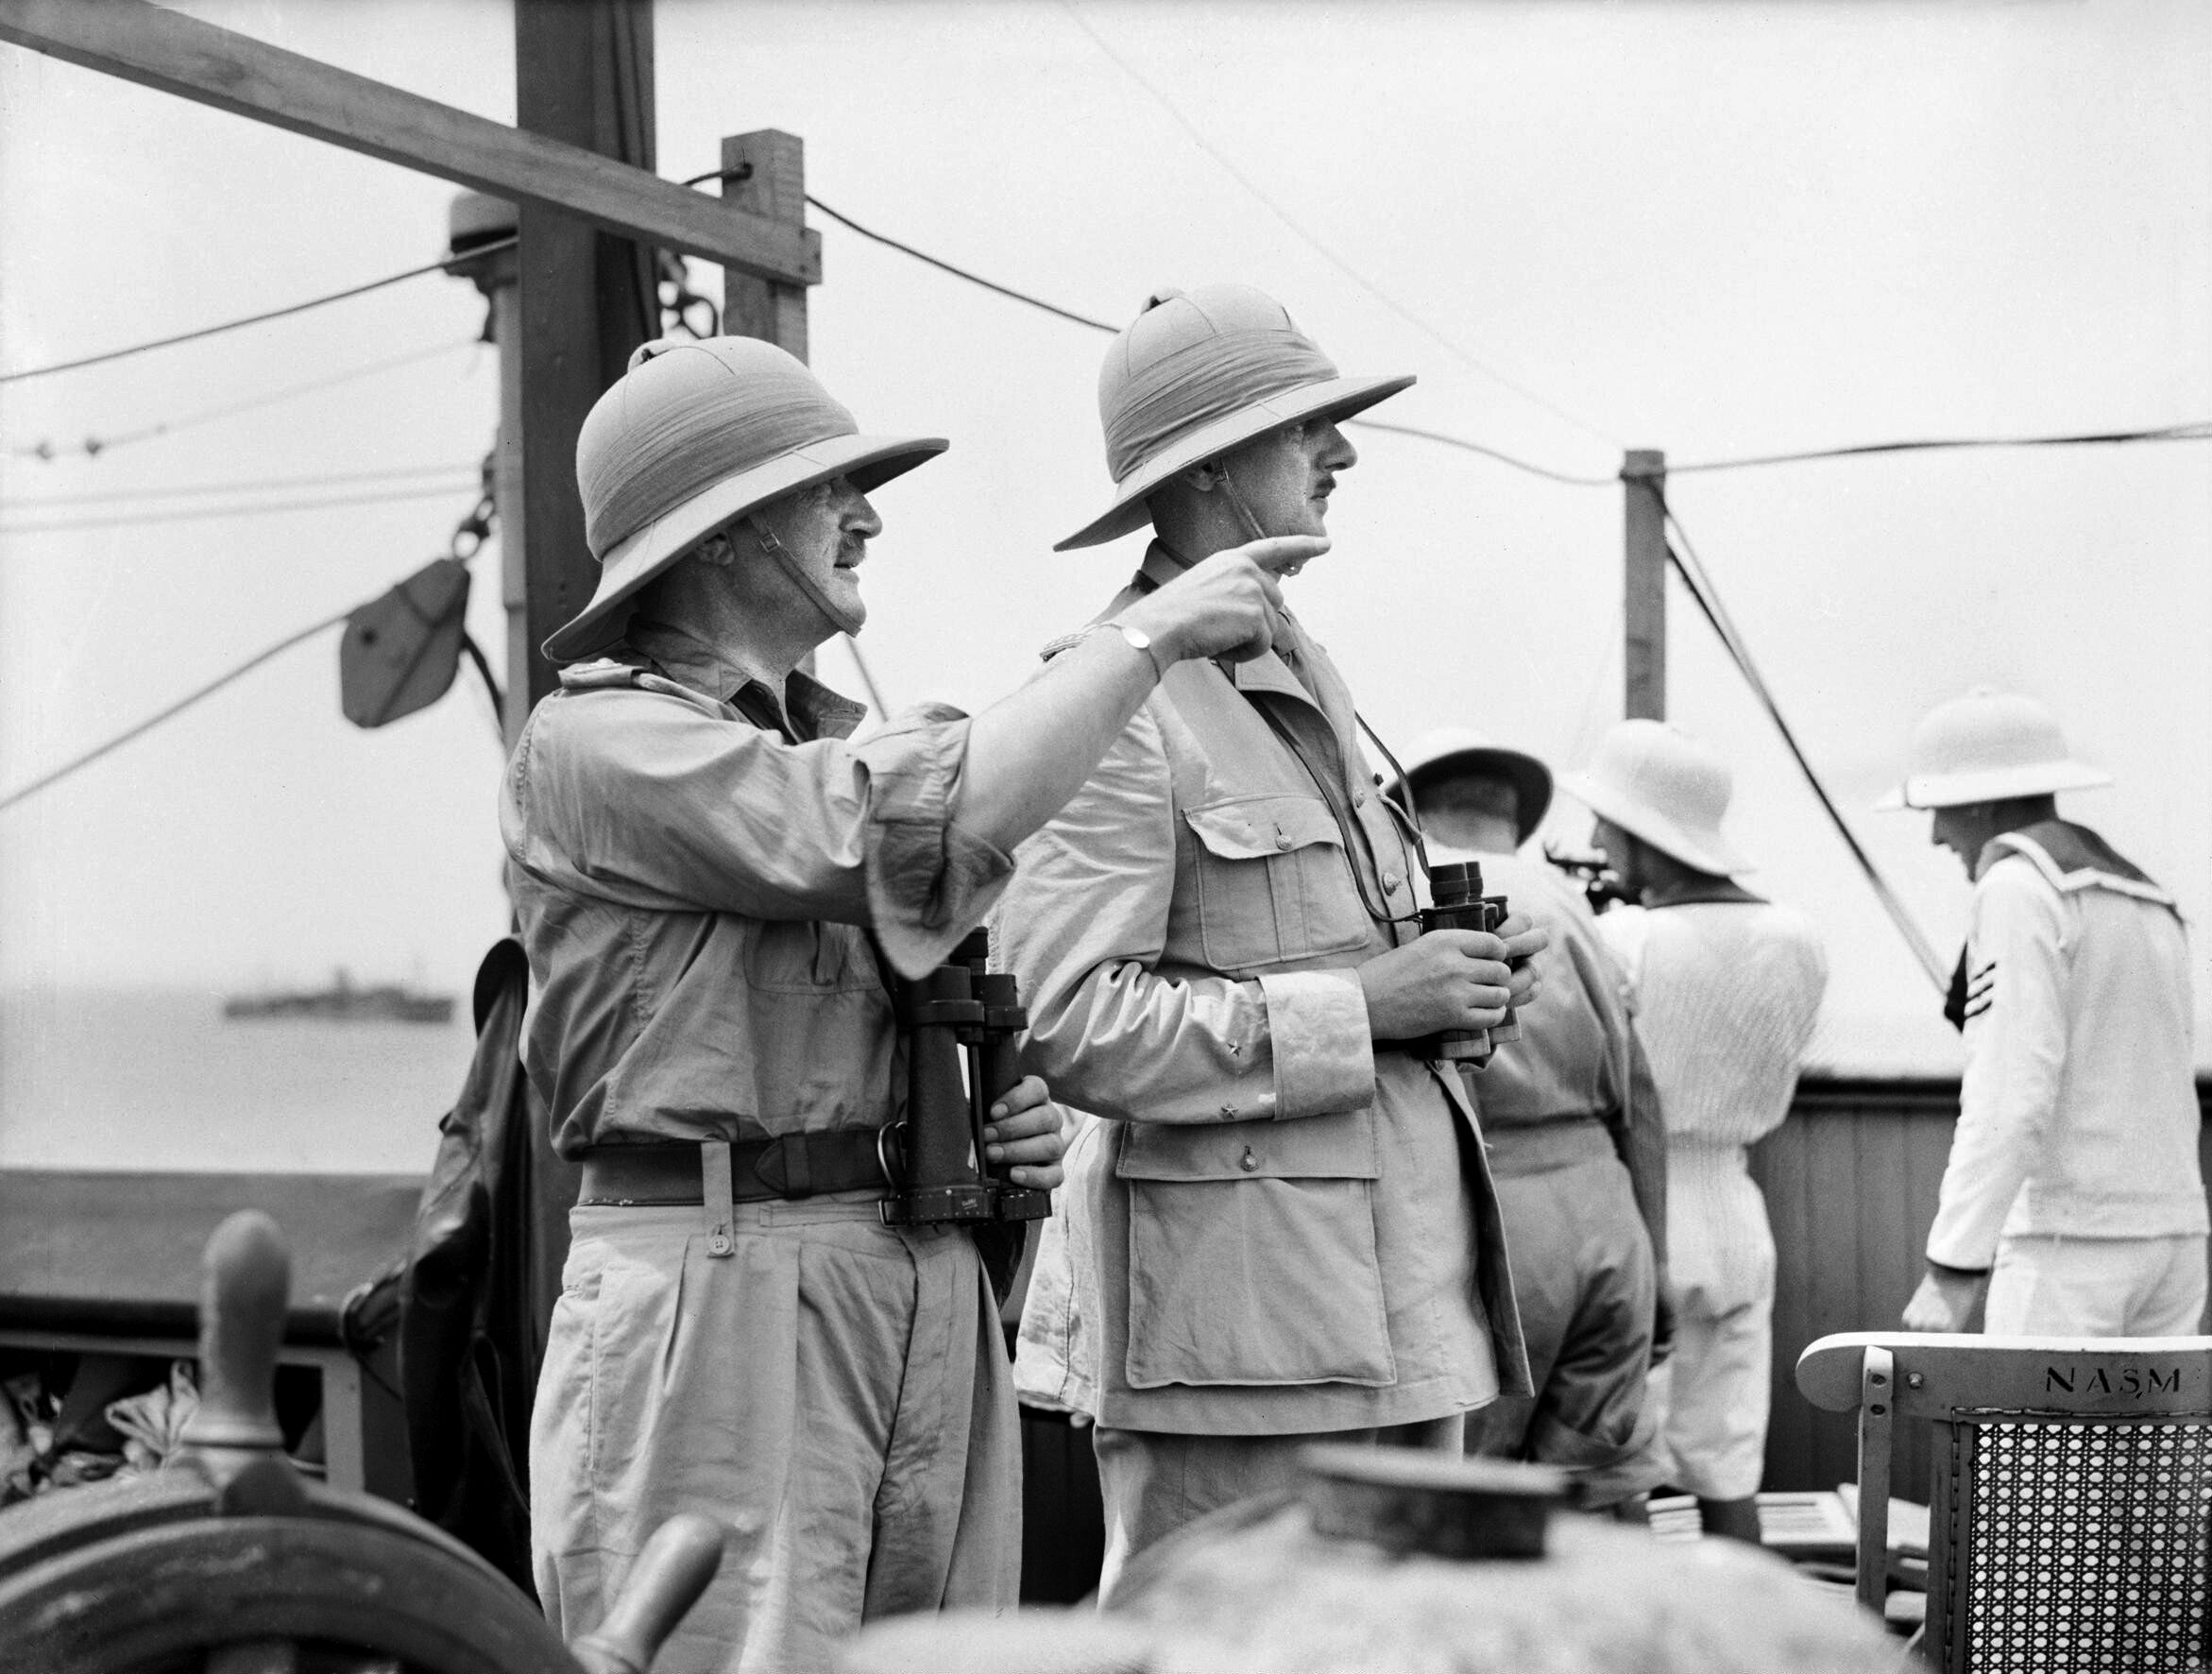 British liaison Edward Spears and Free French leader Charles de Gaulle watch as the combined Free French and British attempt to capture the Vichy-controlled port of Dakar, Senegal. The operation on the coast of West Africa was an embarrassing debacle. 